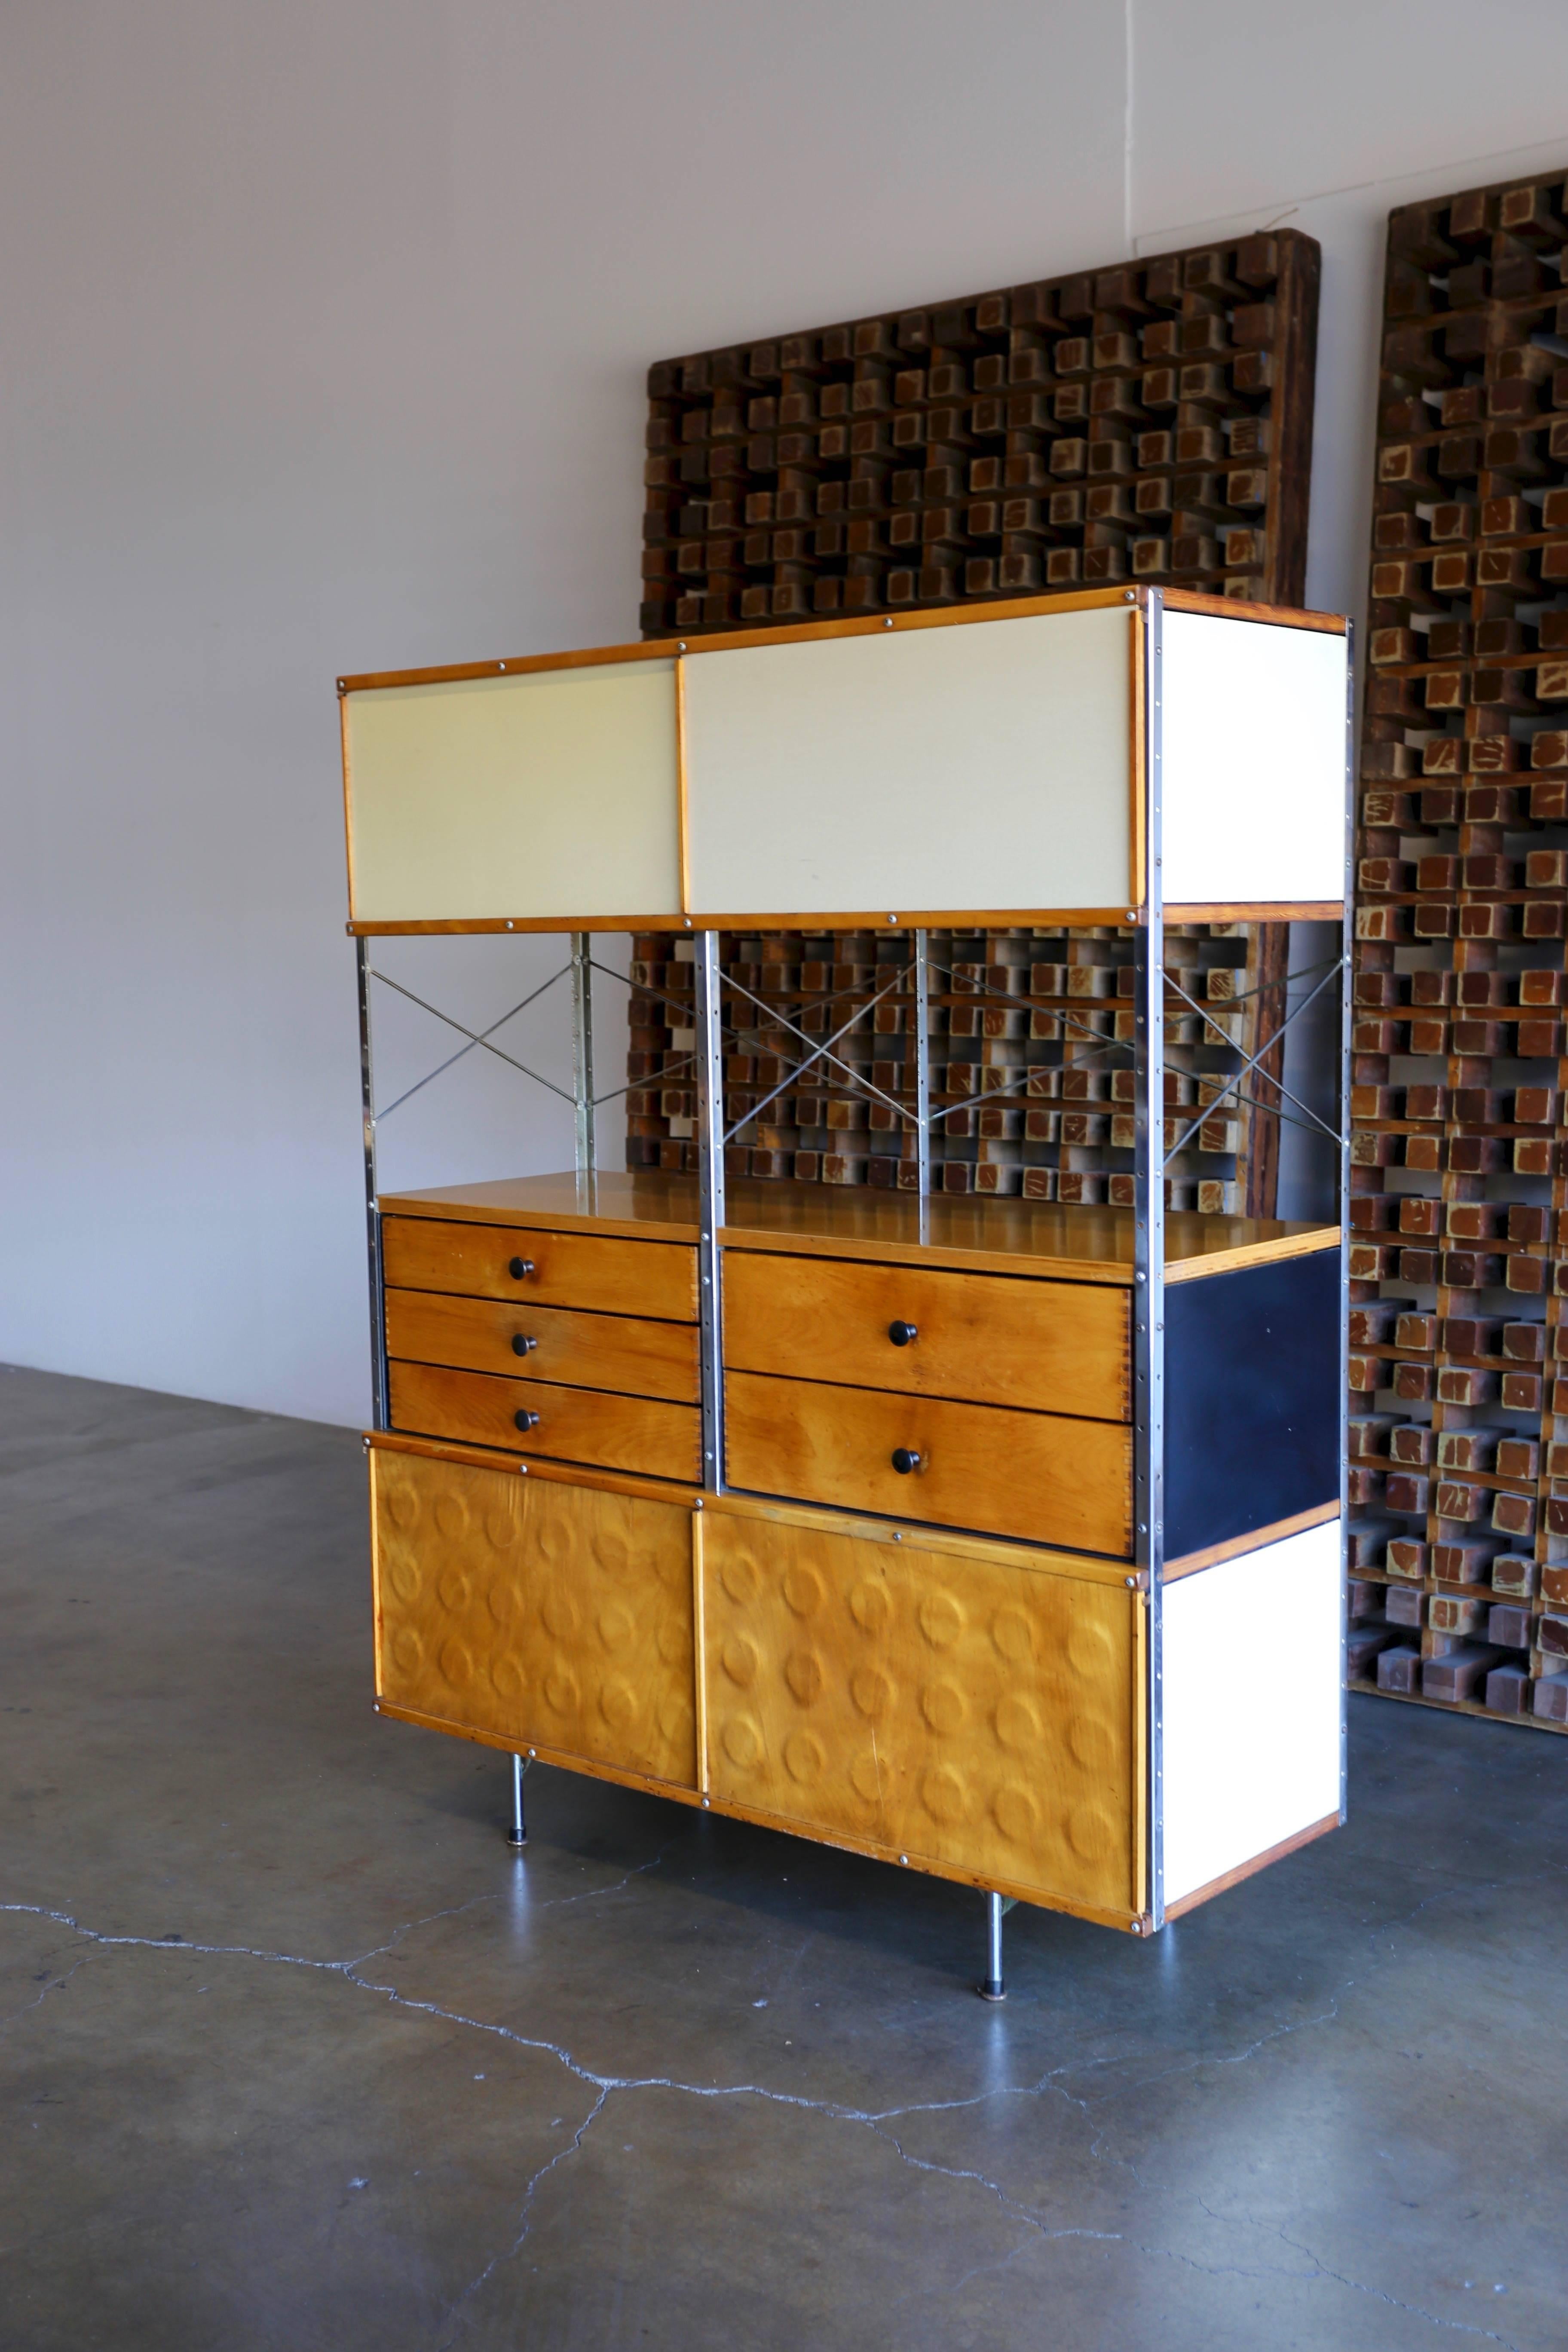 Eames storage unit 'ESU' 400-N. Designed by Charles & Ray Eames. This piece was produced by Herman Miller, circa 1952.